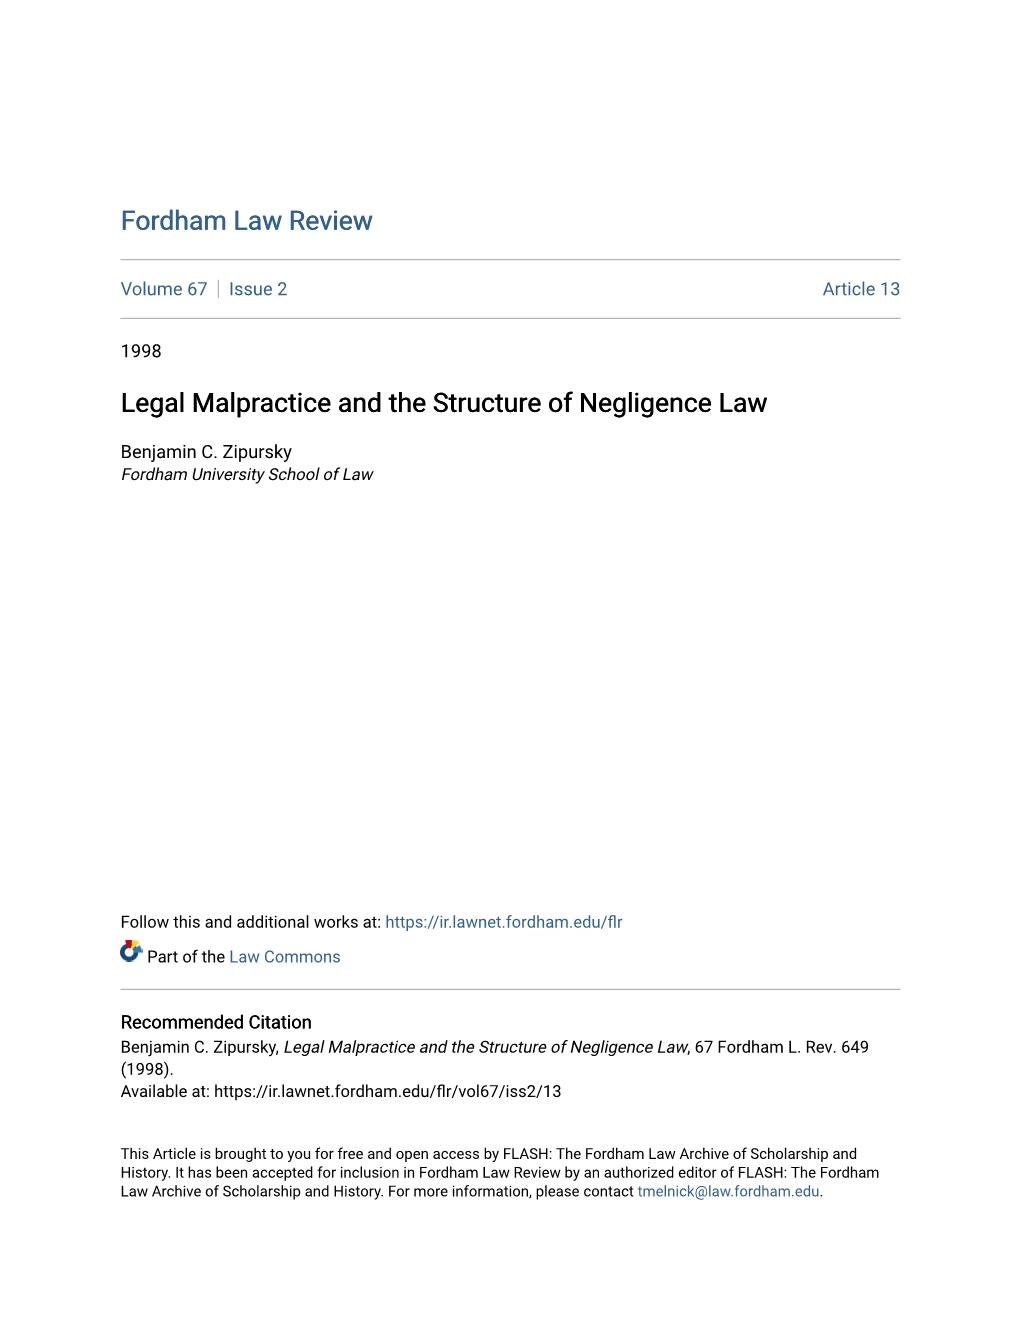 Legal Malpractice and the Structure of Negligence Law